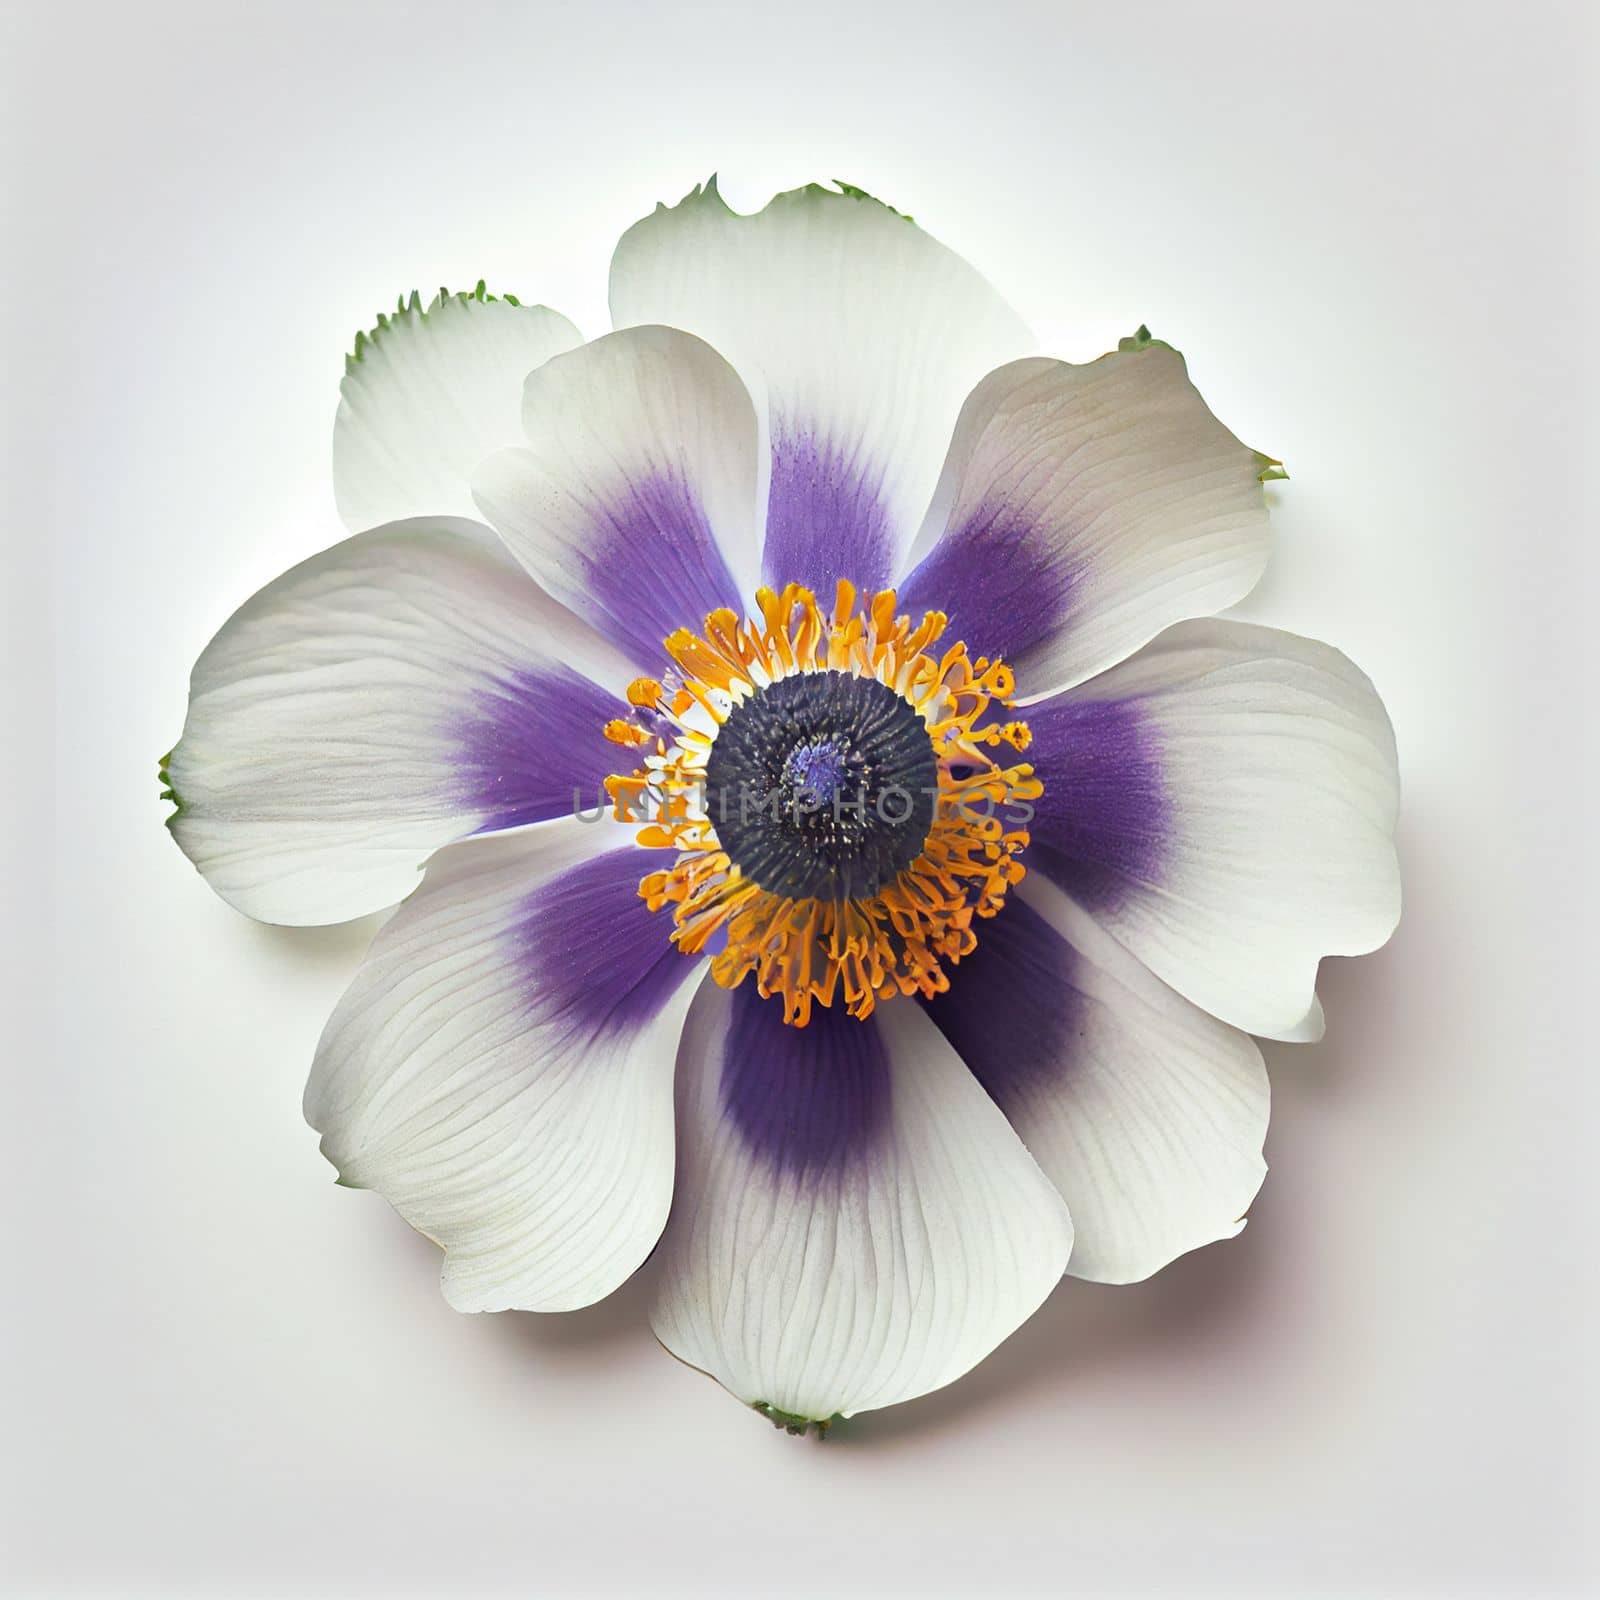 Top view of Anemone flower on a white background, perfect for representing the theme of Valentine's Day.